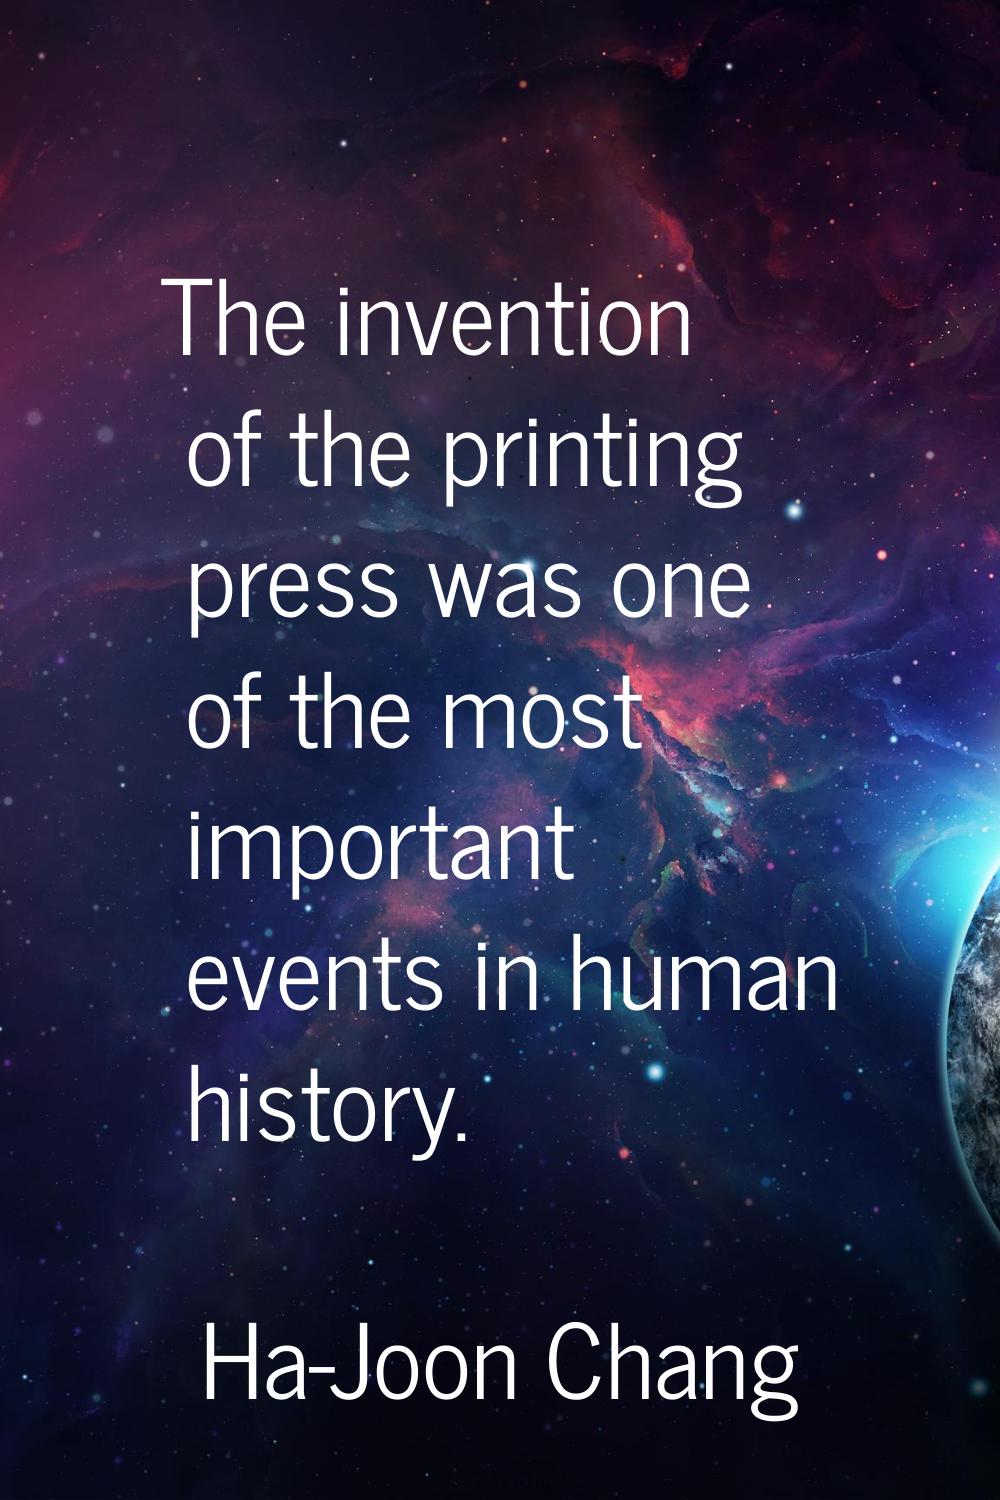 The invention of the printing press was one of the most important events in human history.